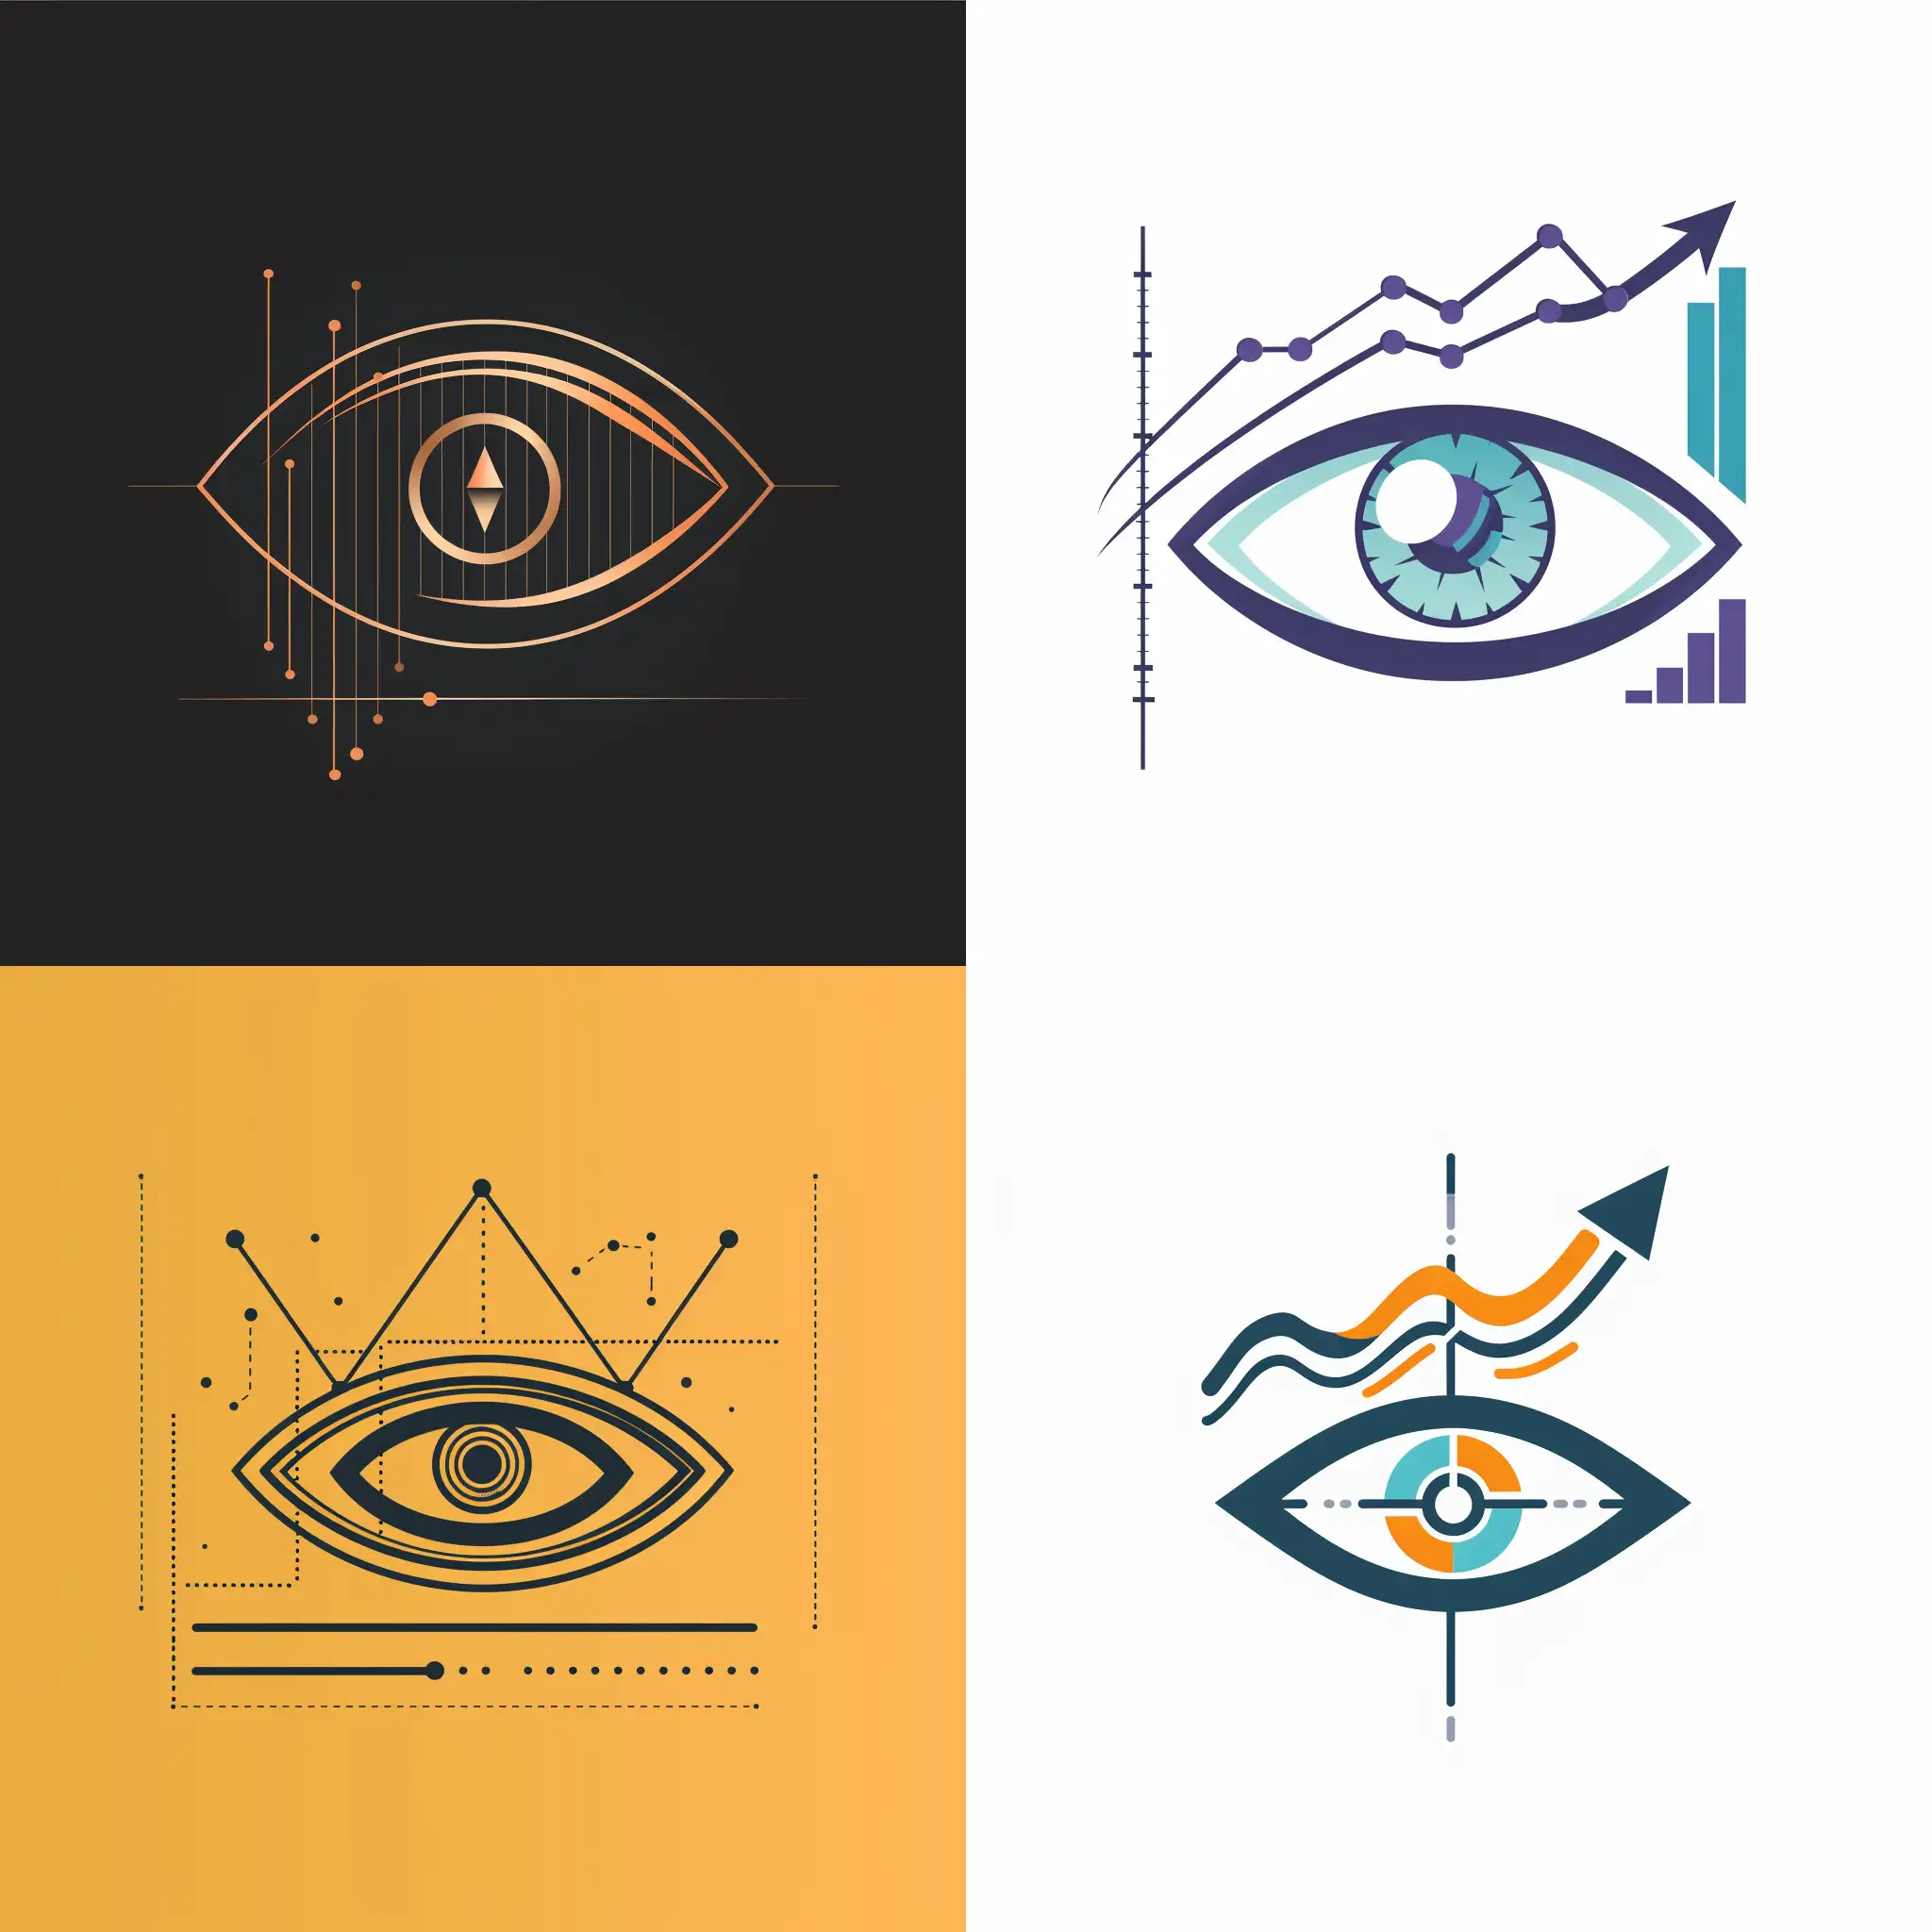 logo of a stylized eye symbolizing growth, with ascending line graph. representing a digital marketing agency, modern style.